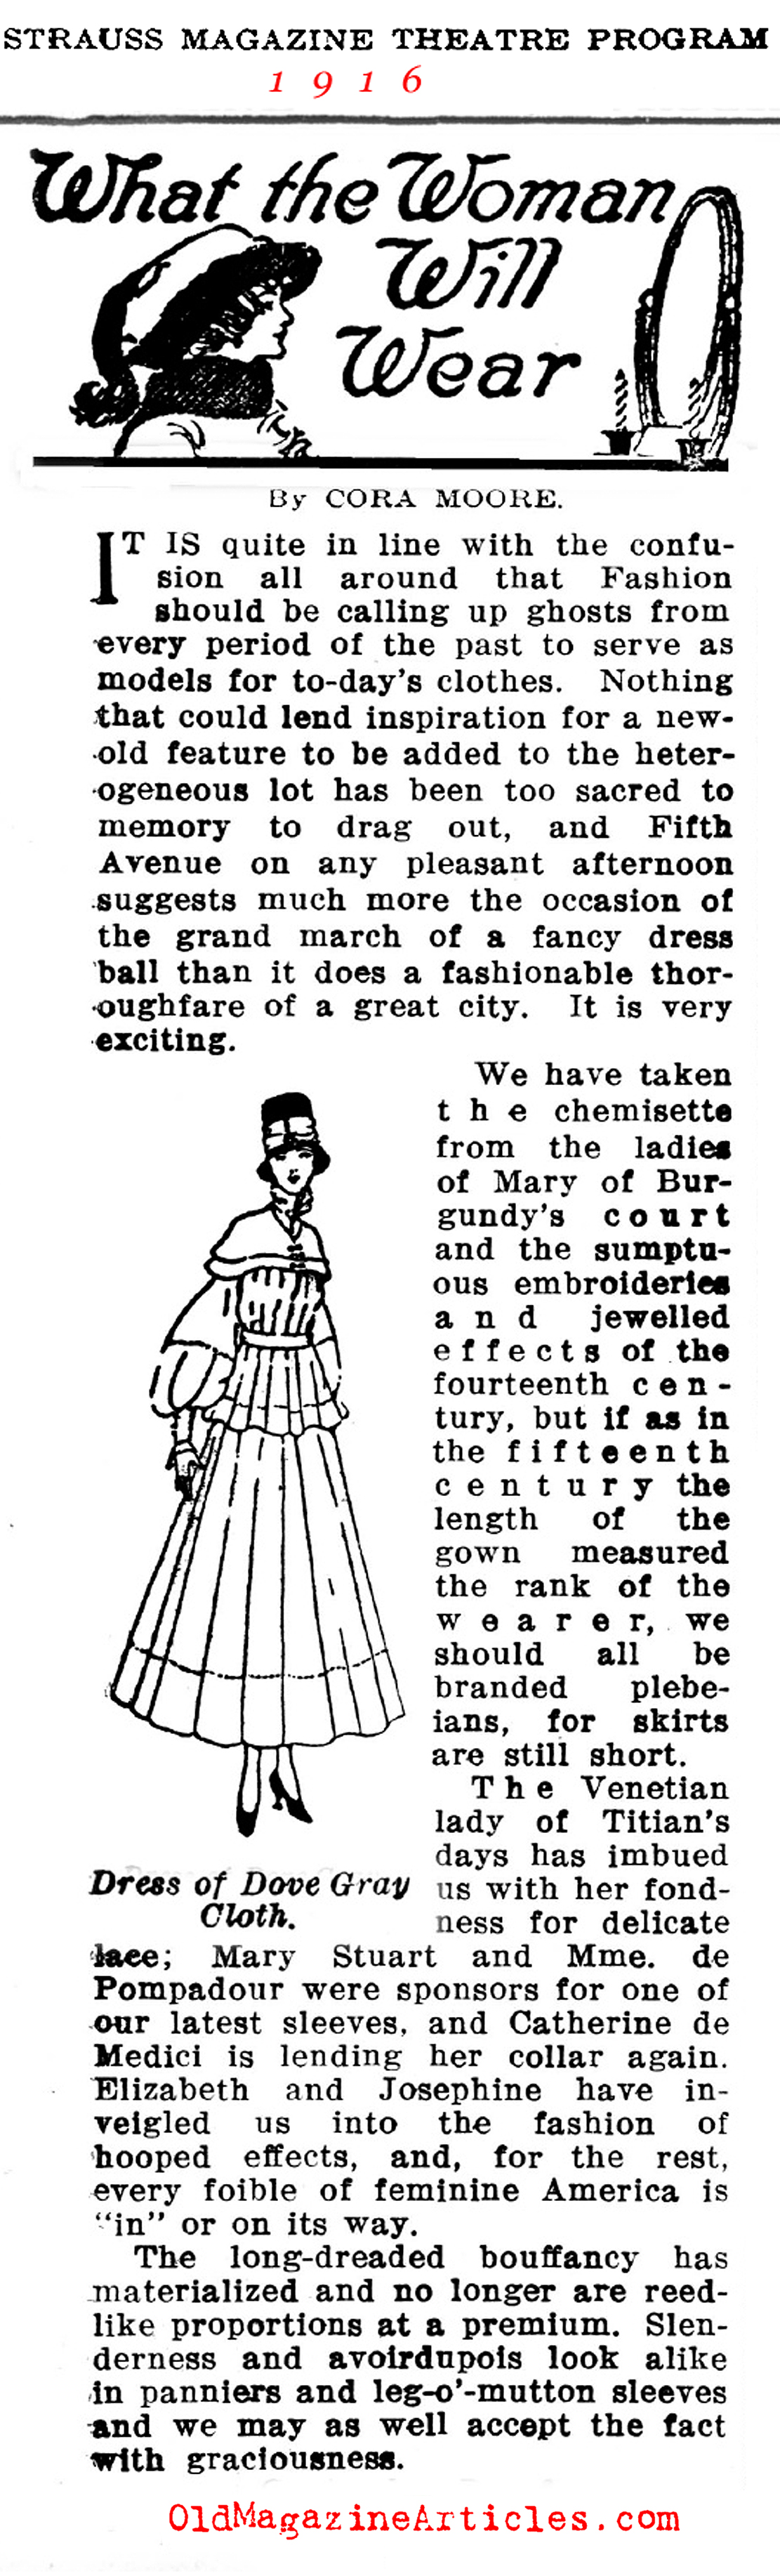 NEW YORK FASHION SPRING 1916,WHAT WERE NEW YORKERS WEARING IN 1916 ...